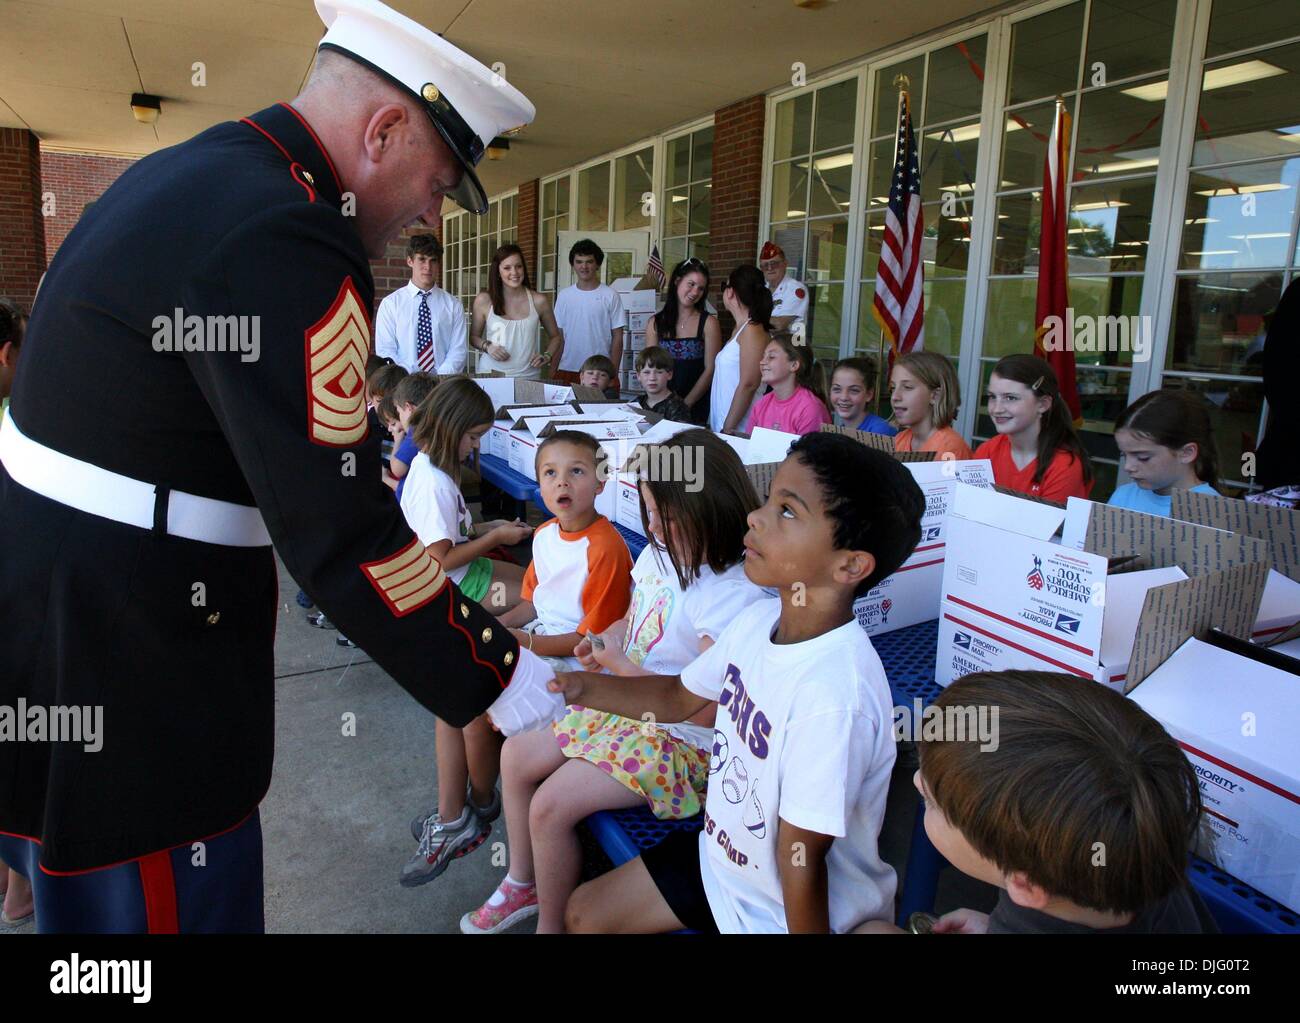 July 02, 2010 - Memphis, Tennessee, U.S. - 2-July 2010- 1st Sgt. Michael Bowen talks to campers, including Peyton Piacenti, on Friday. In celebration of the 4th of July summer campers at St. Agnes-St. Dominic joined members of the Marine Corps Reserves and the Marine Corps League to fill care packages for our military in Afghanistan on Friday. The campers and Marine Reservists fill Stock Photo